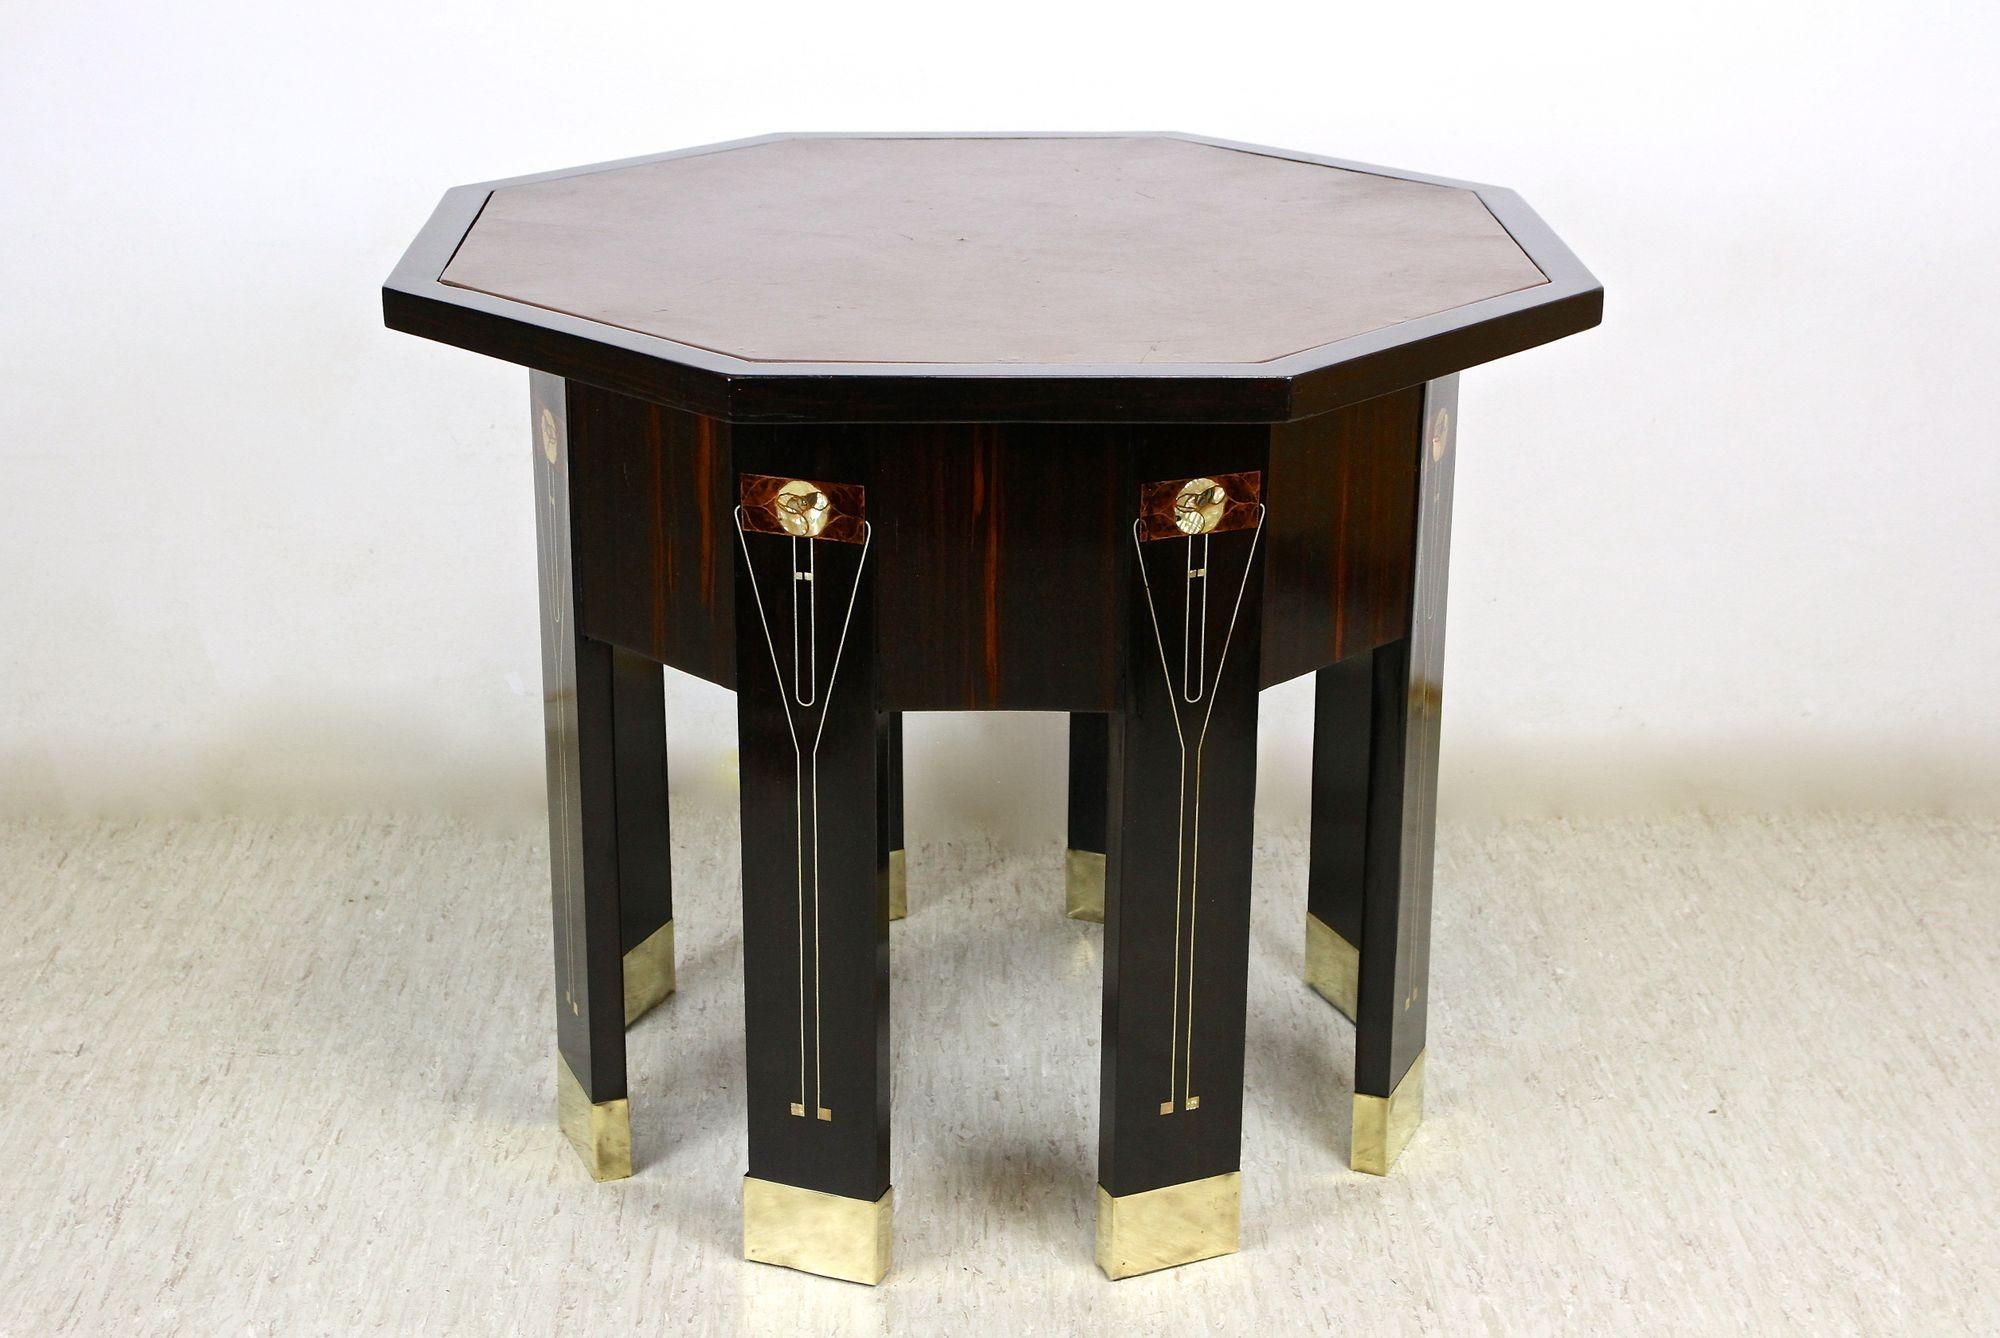 Absolute outstanding, one of kind Art Nouveau Palisander table from the very early 20th century in Vienna around 1905. This impressive antique coffee table is not just a 